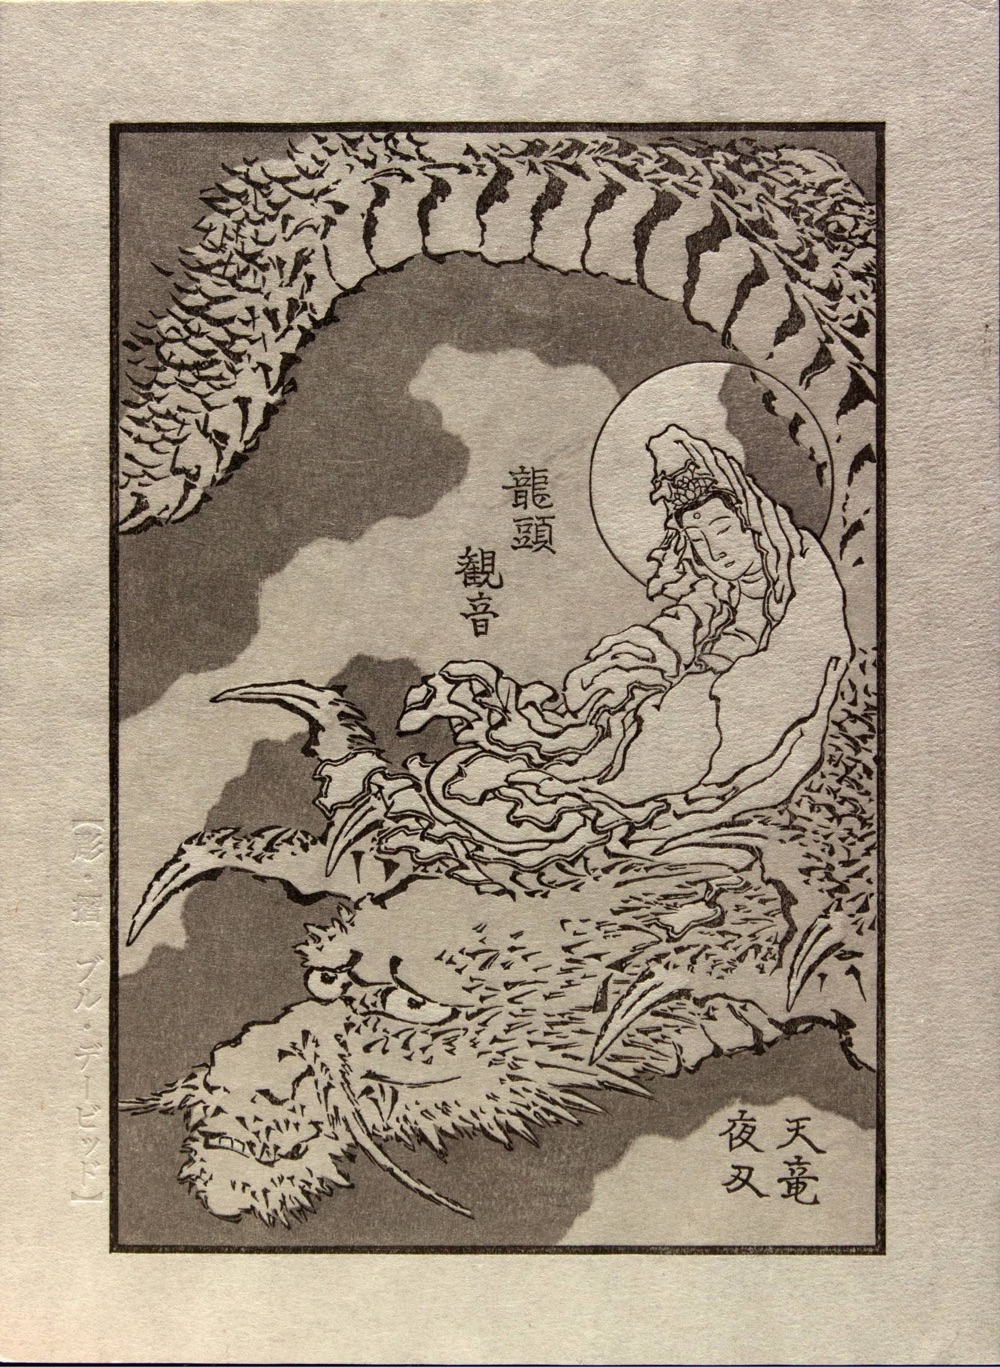 a woodblock print of an original drawing by Hokusai depicting a figure resting on the head of a dragon